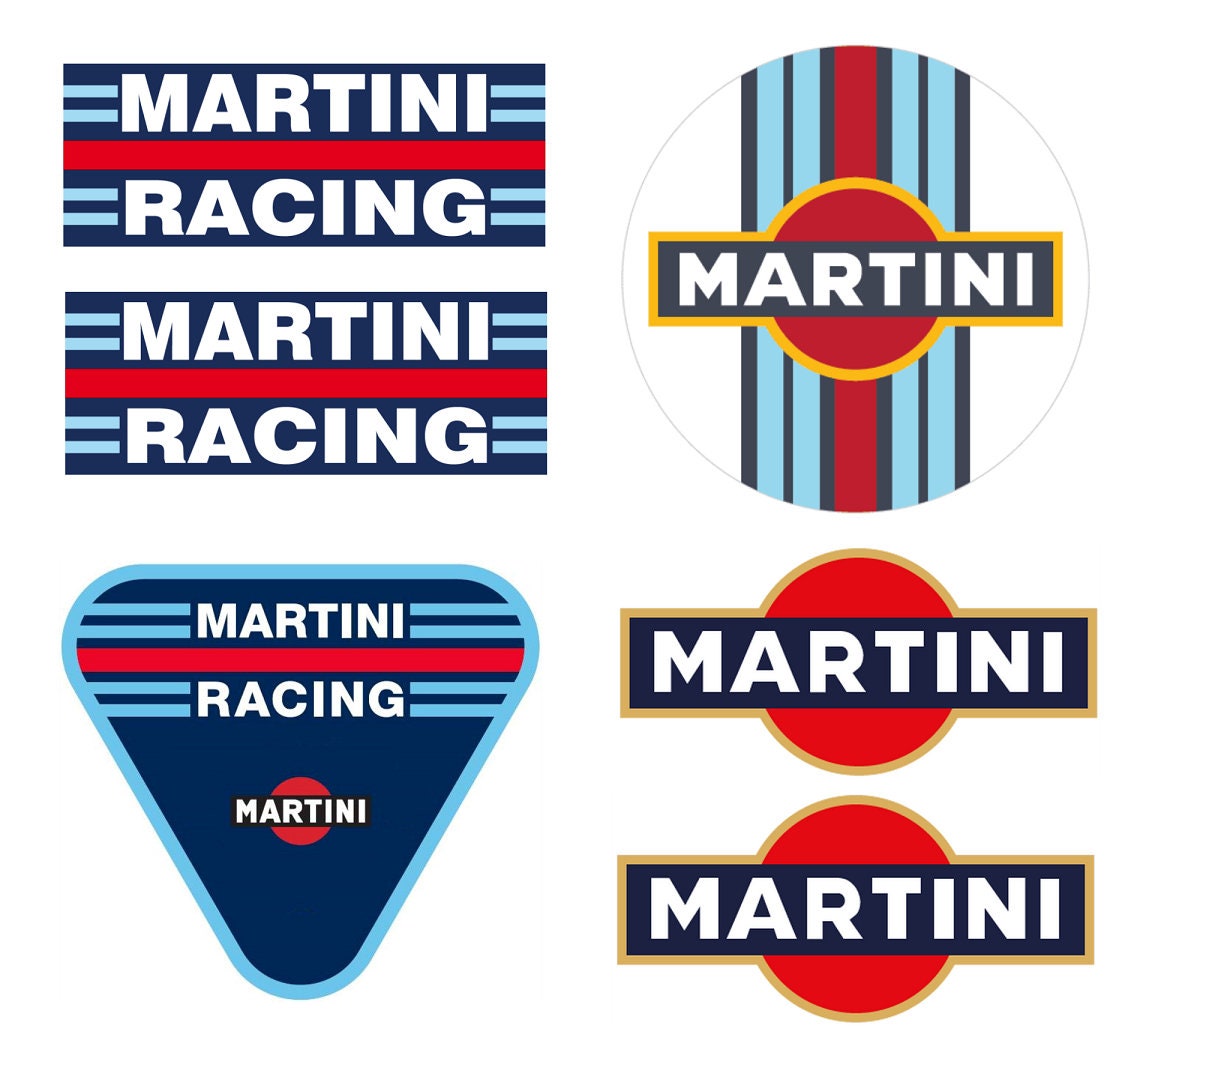 2 Martini Racing Logo - Graphics Decals Sticker Kit - the Logo are